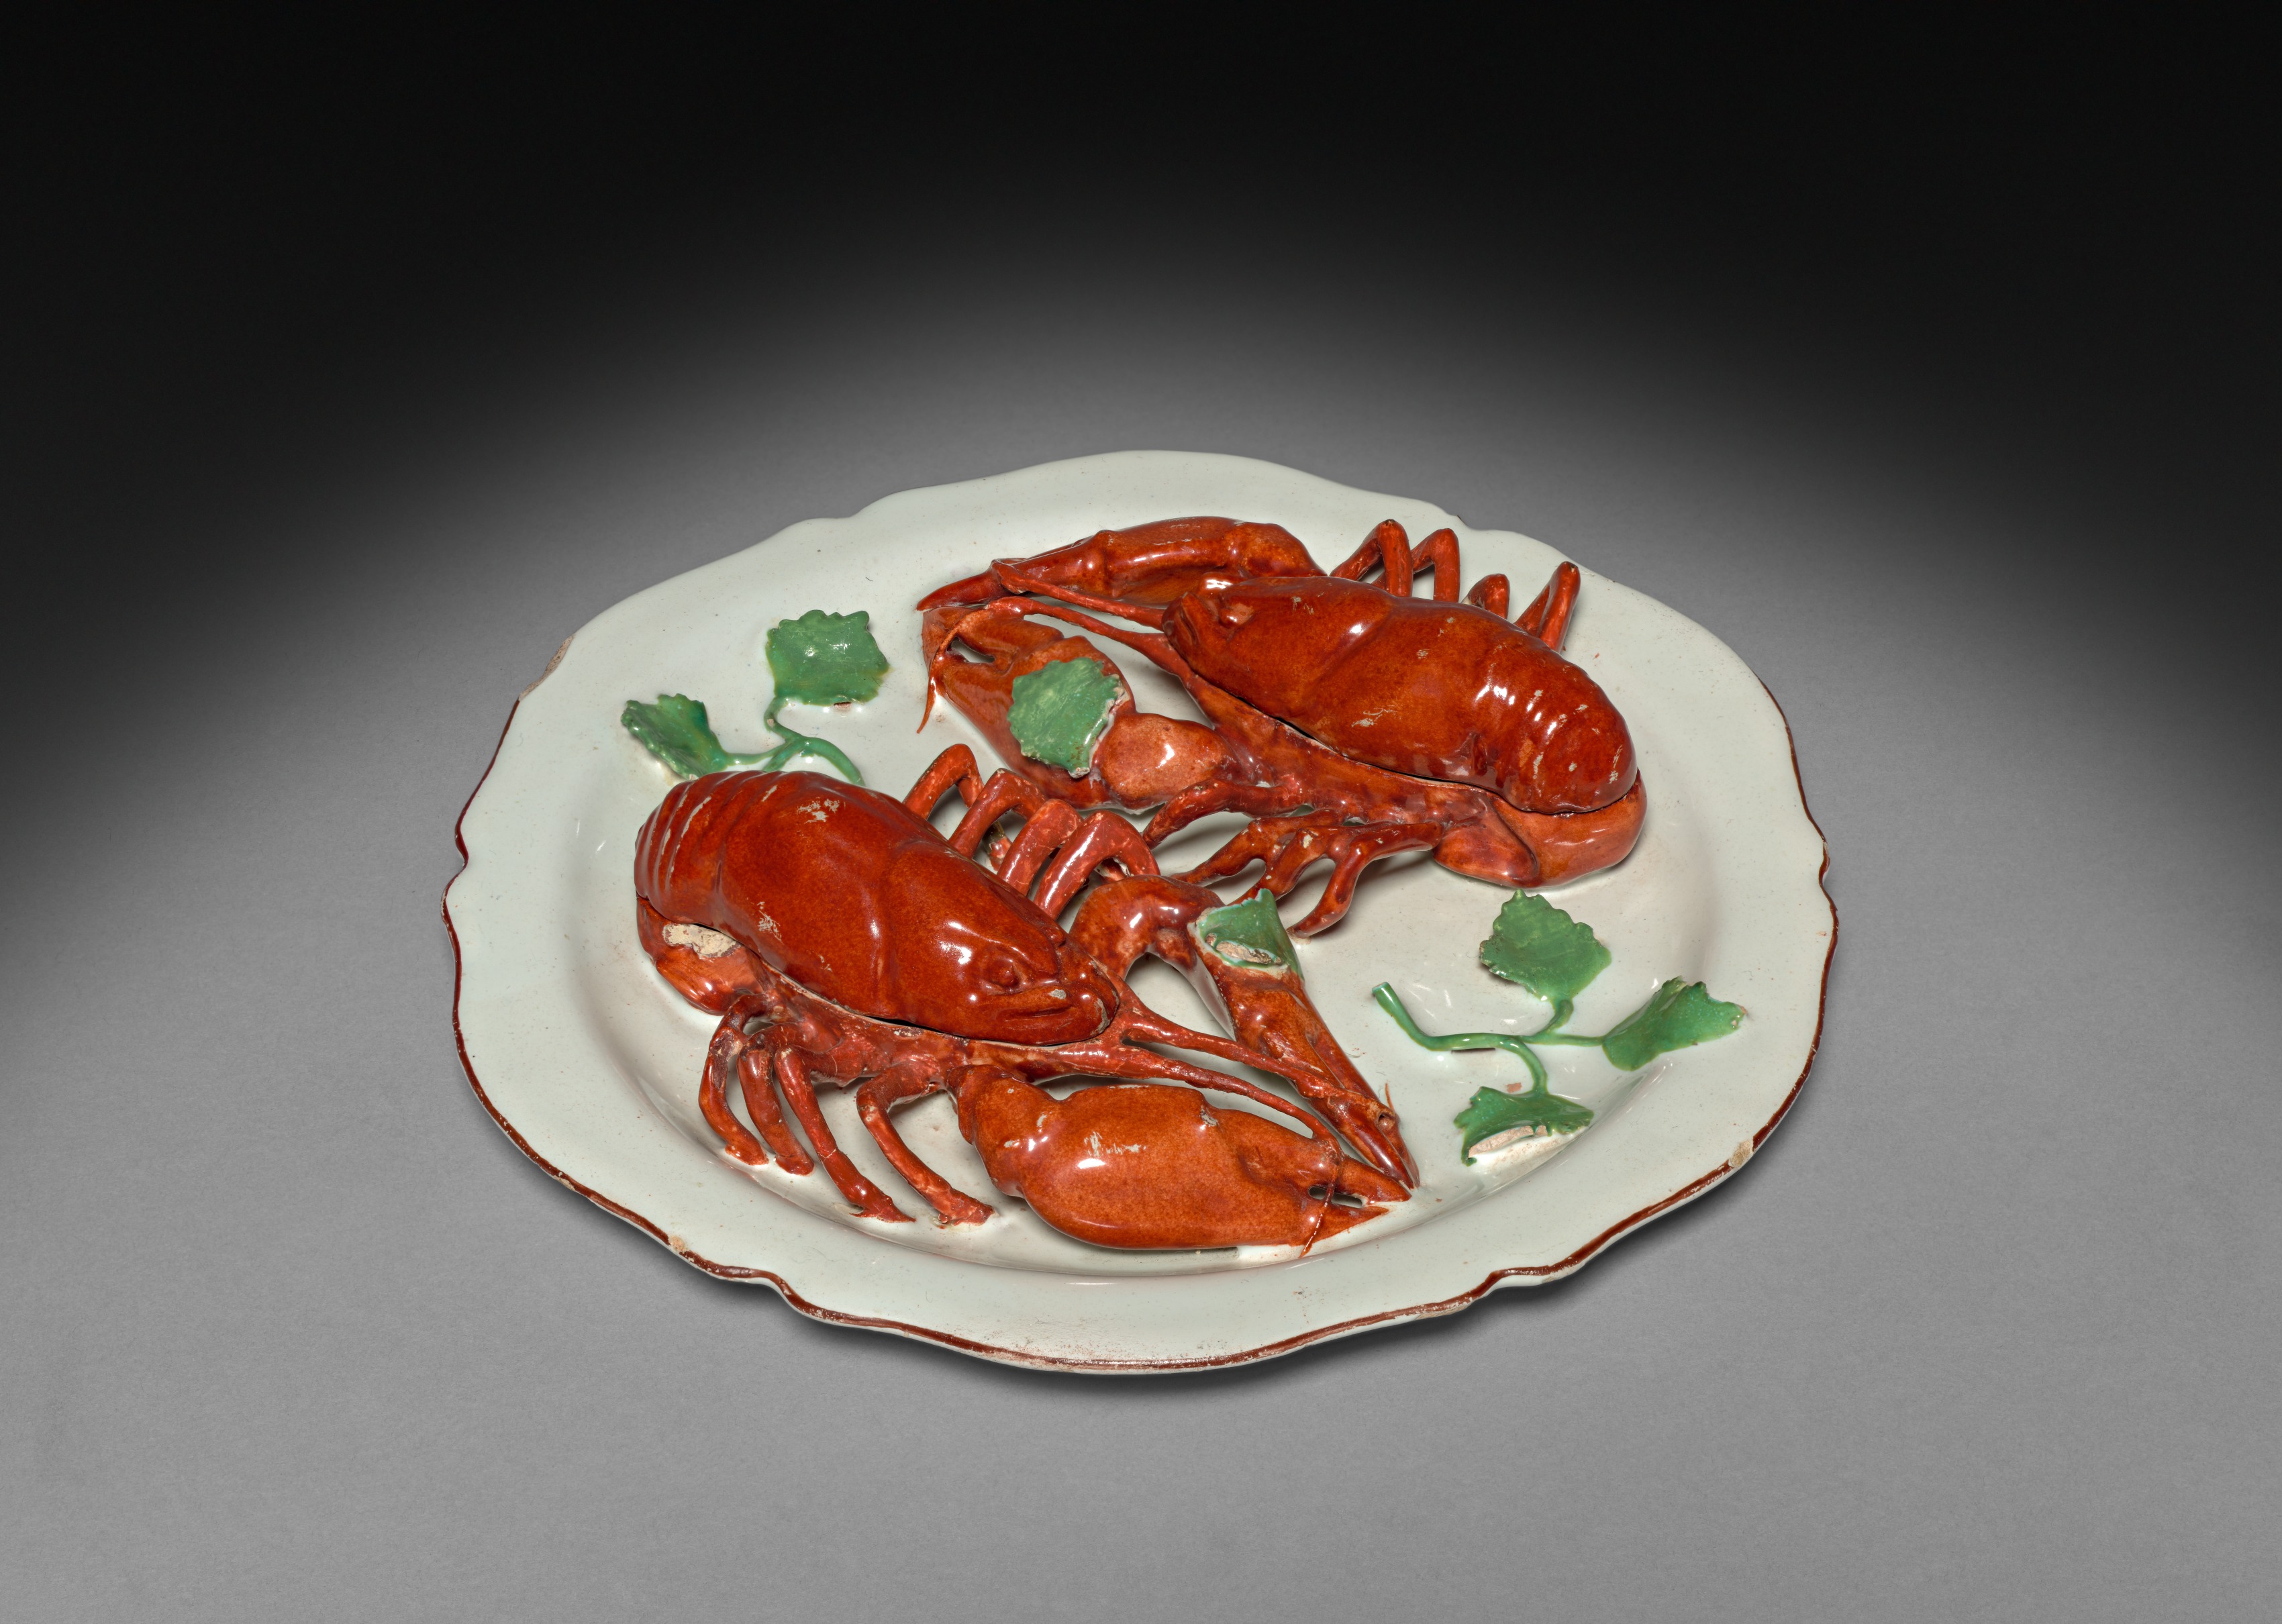 Plate with Crayfish and lid